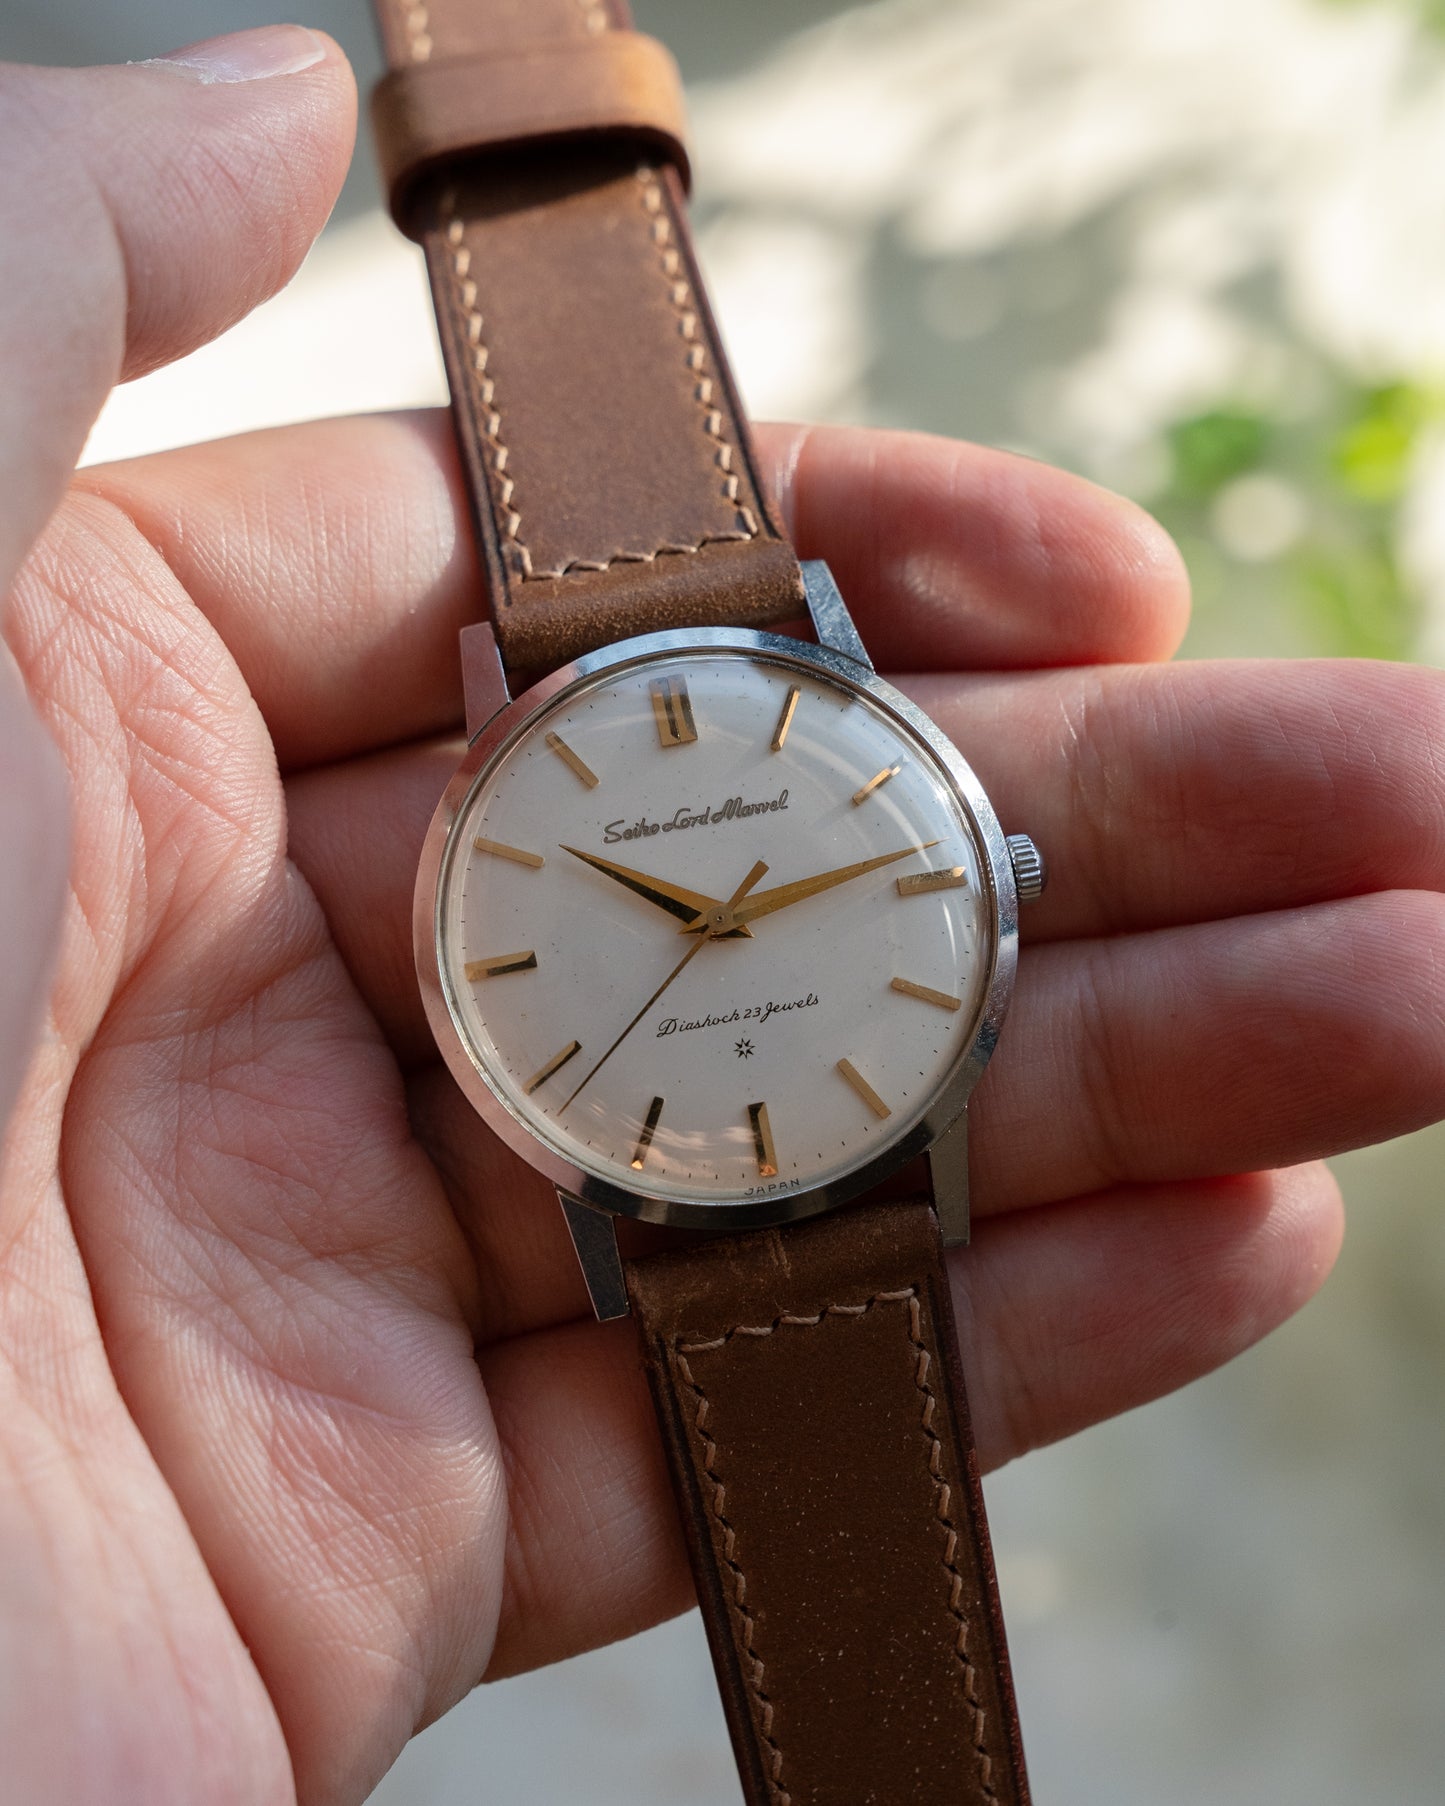 Seiko Lord Marvel 1st generation, carved mark 3 dial, Oct 1959, "Shirokin"